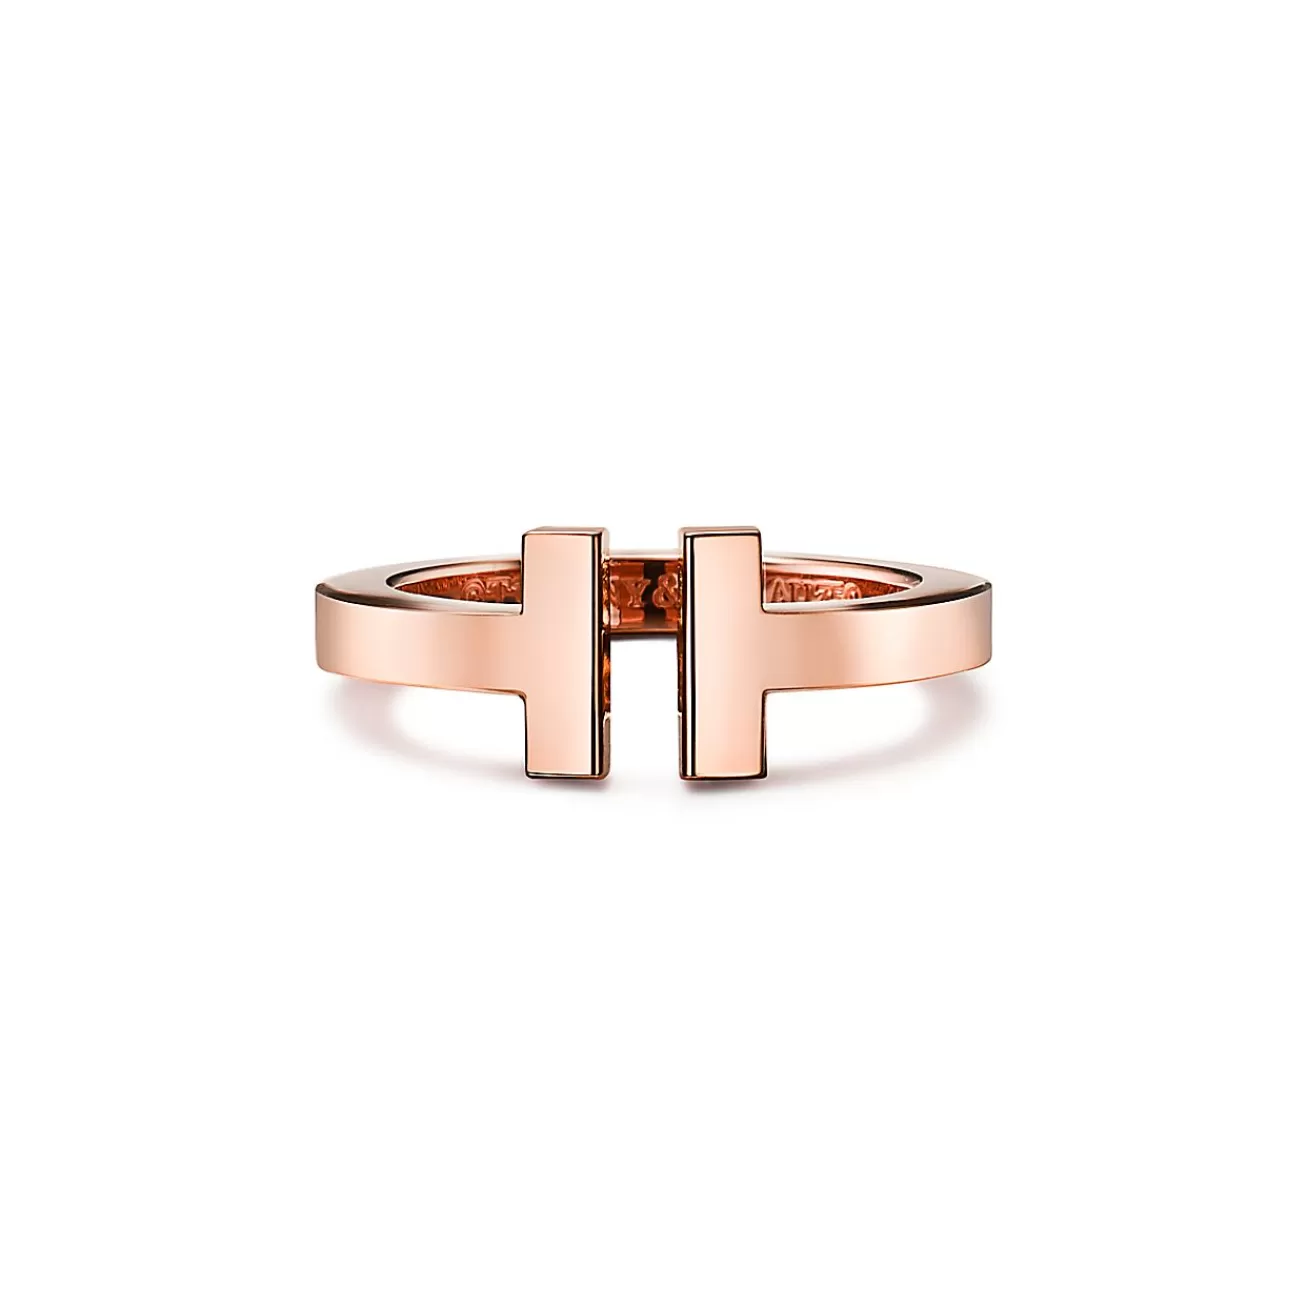 Tiffany & Co. Tiffany T Square Ring in Rose Gold | ^ Rings | Men's Jewelry